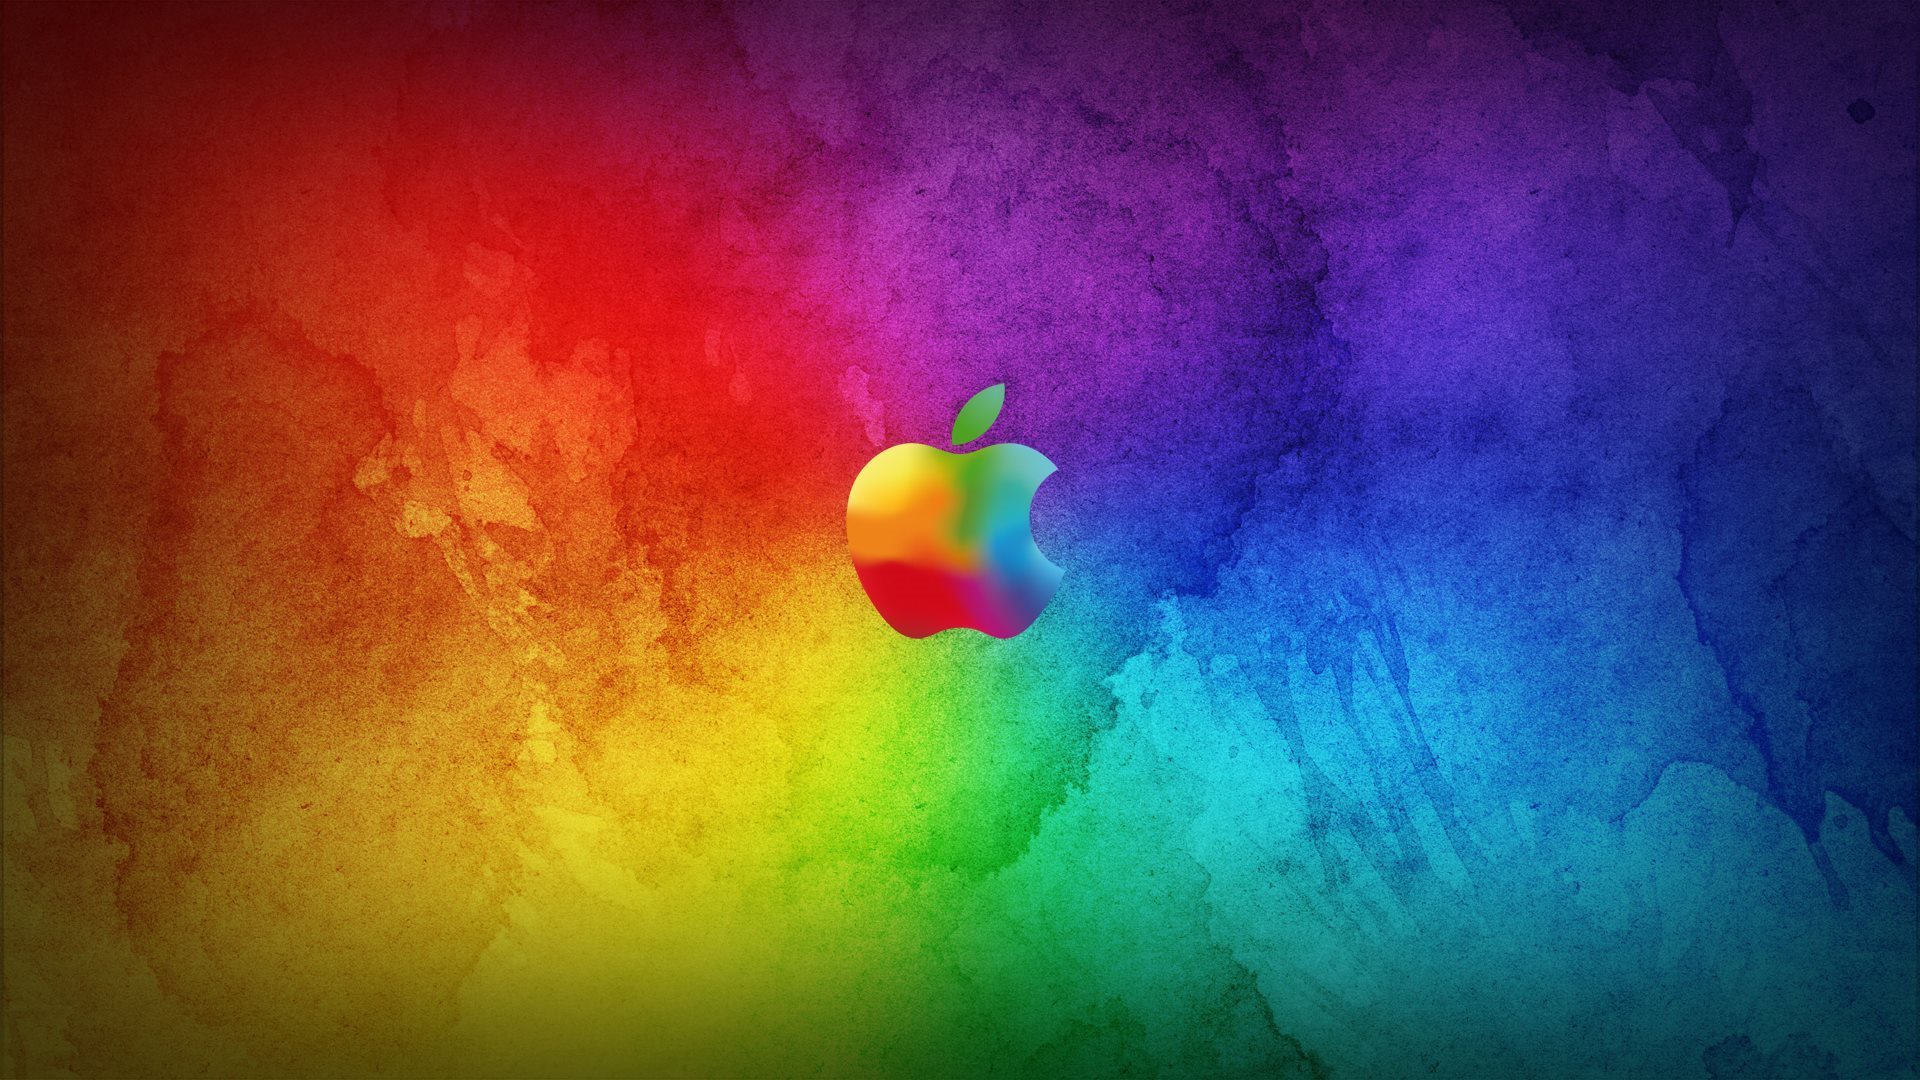 Free Download Download Amazing Colorful Apple Logo Wallpaper Full Hd Wallpapers 19x1080 For Your Desktop Mobile Tablet Explore 50 Apple Wallpaper Hd Mac Wallpaper Hd Desktop Wallpaper For Mac Apple Wallpapers